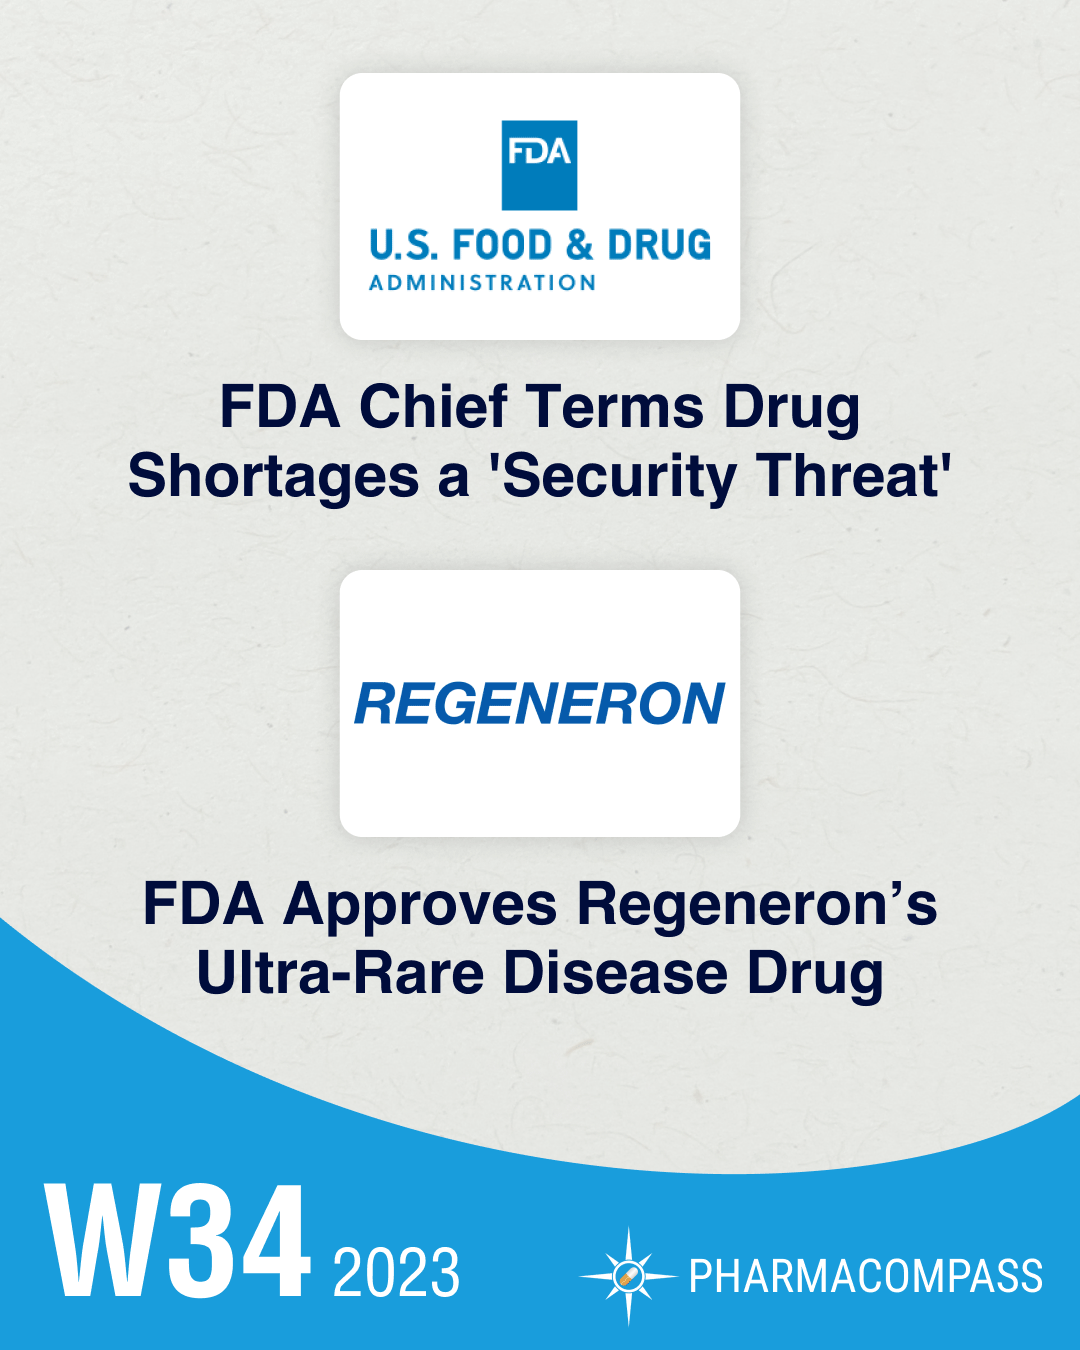 Two Regeneron drugs bag approval; FDA chief links drug shortages to low-priced generics